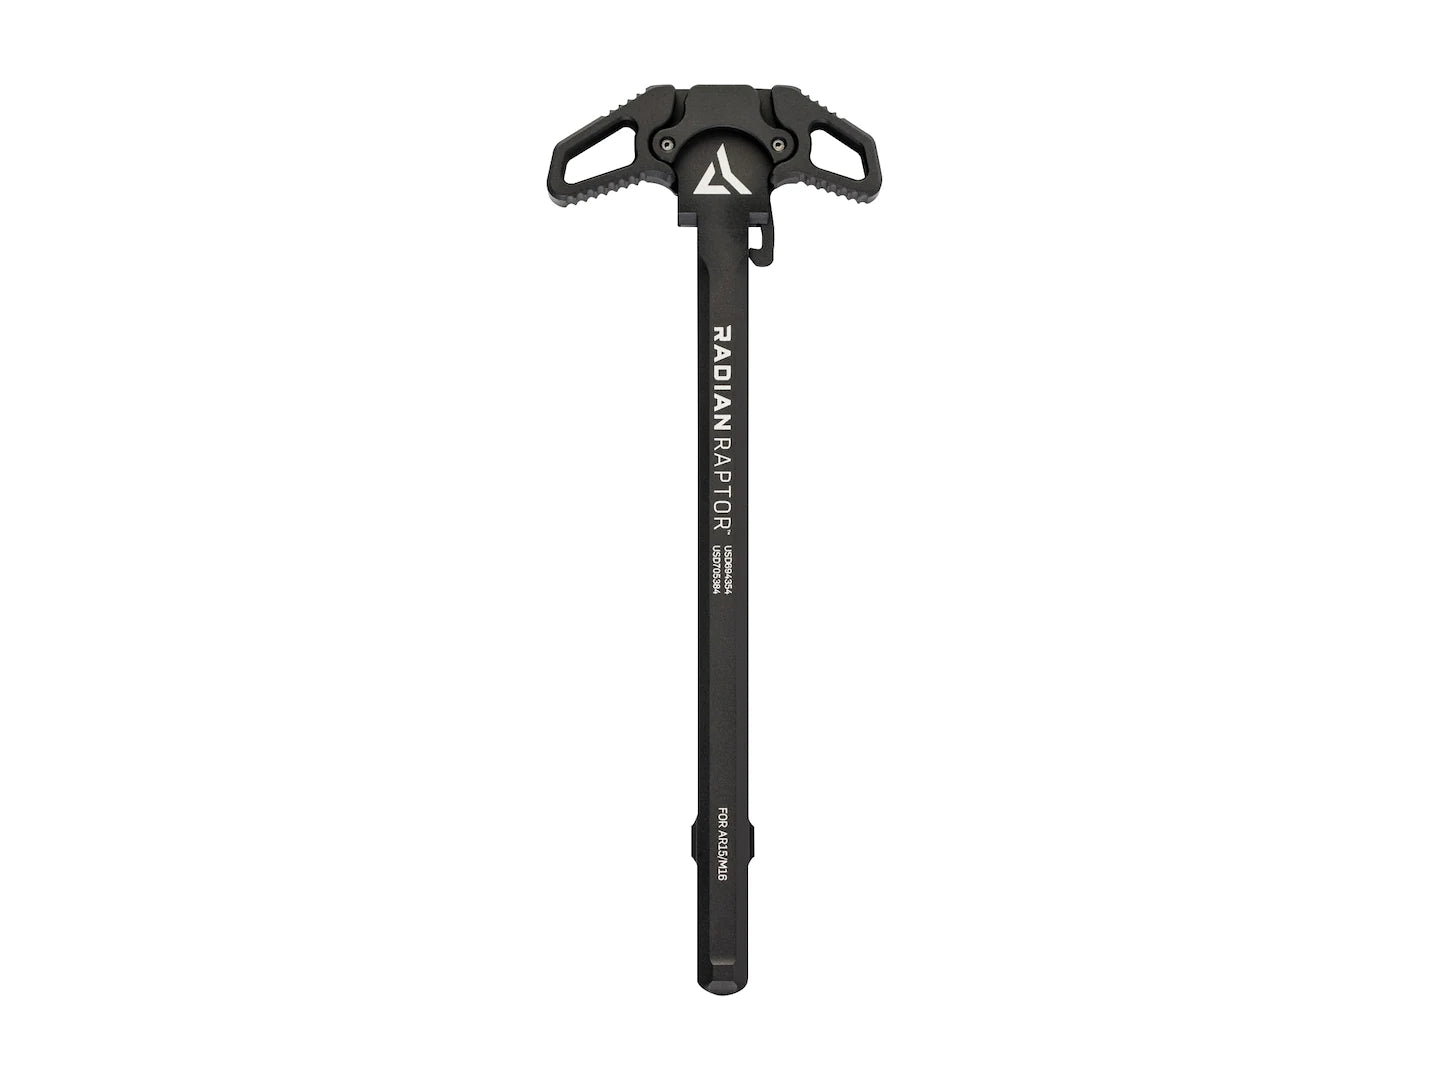 Radian Raptor Ambidextrous Charging Handle Assembly